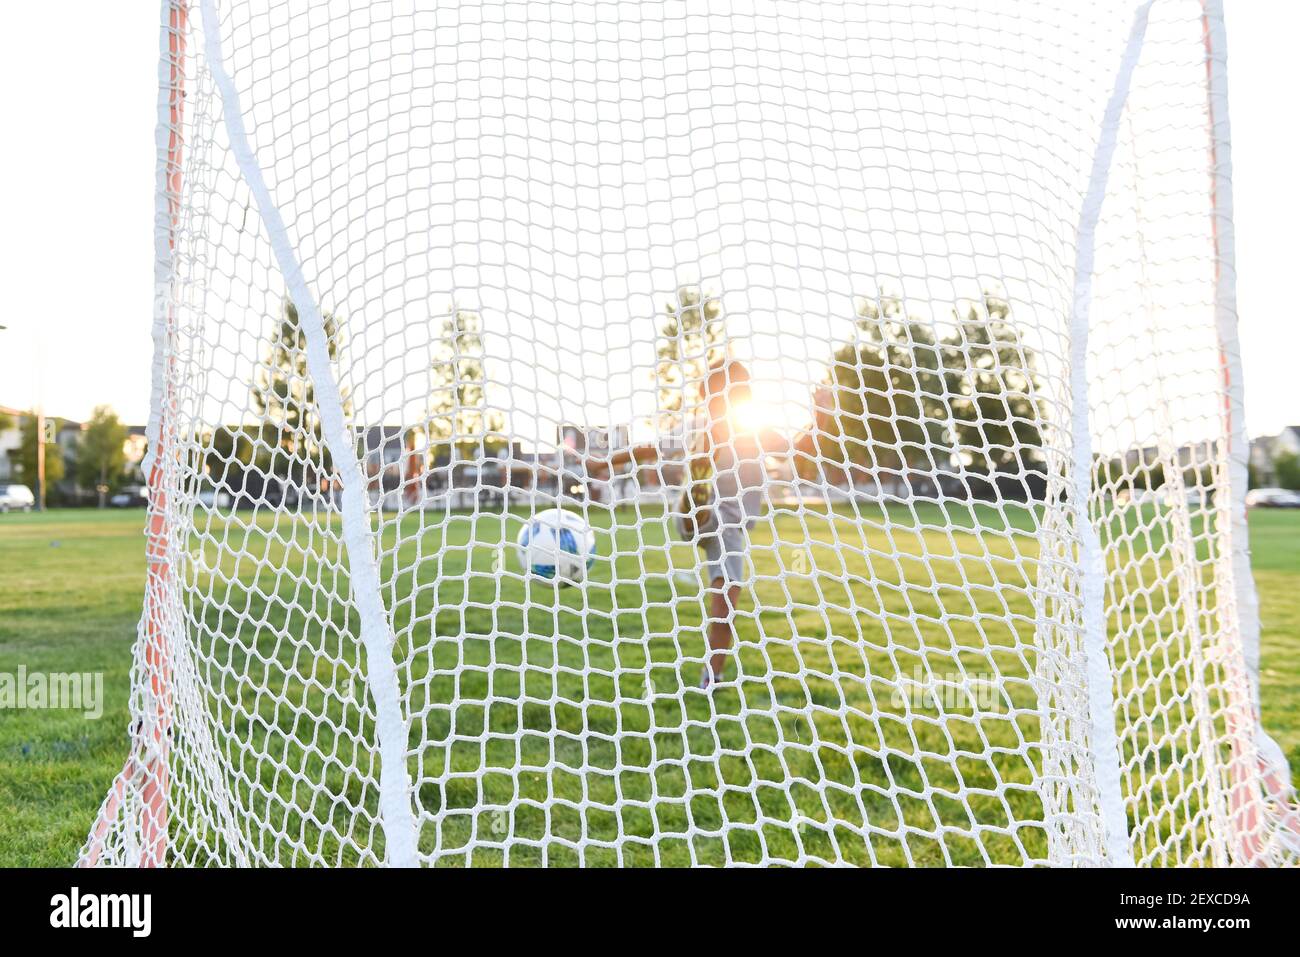 A soccer ball in mid-air after a young boy kicks the ball into the net Stock Photo